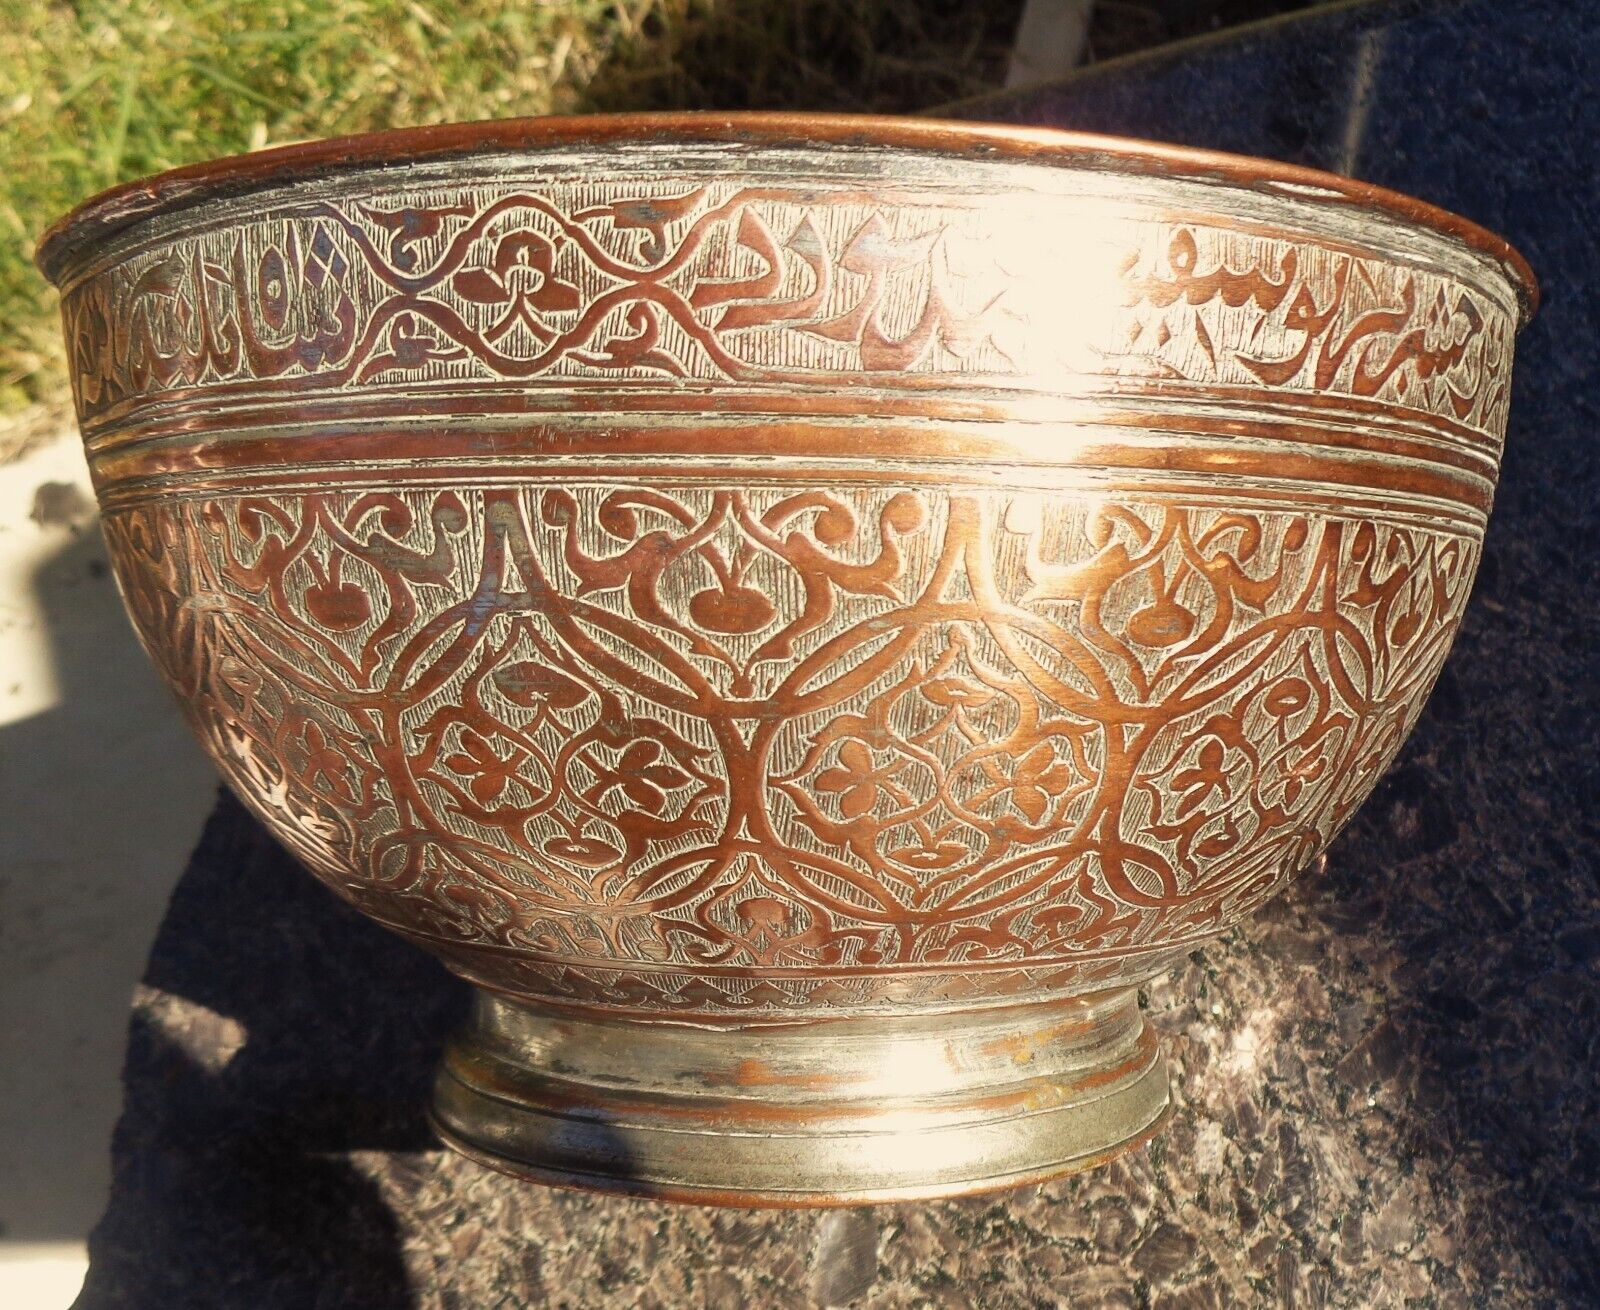 RARE ANTIQUE MIDDLE EASTERN ISLAMIC TIMURID COPPER BOWL XVth CENT.